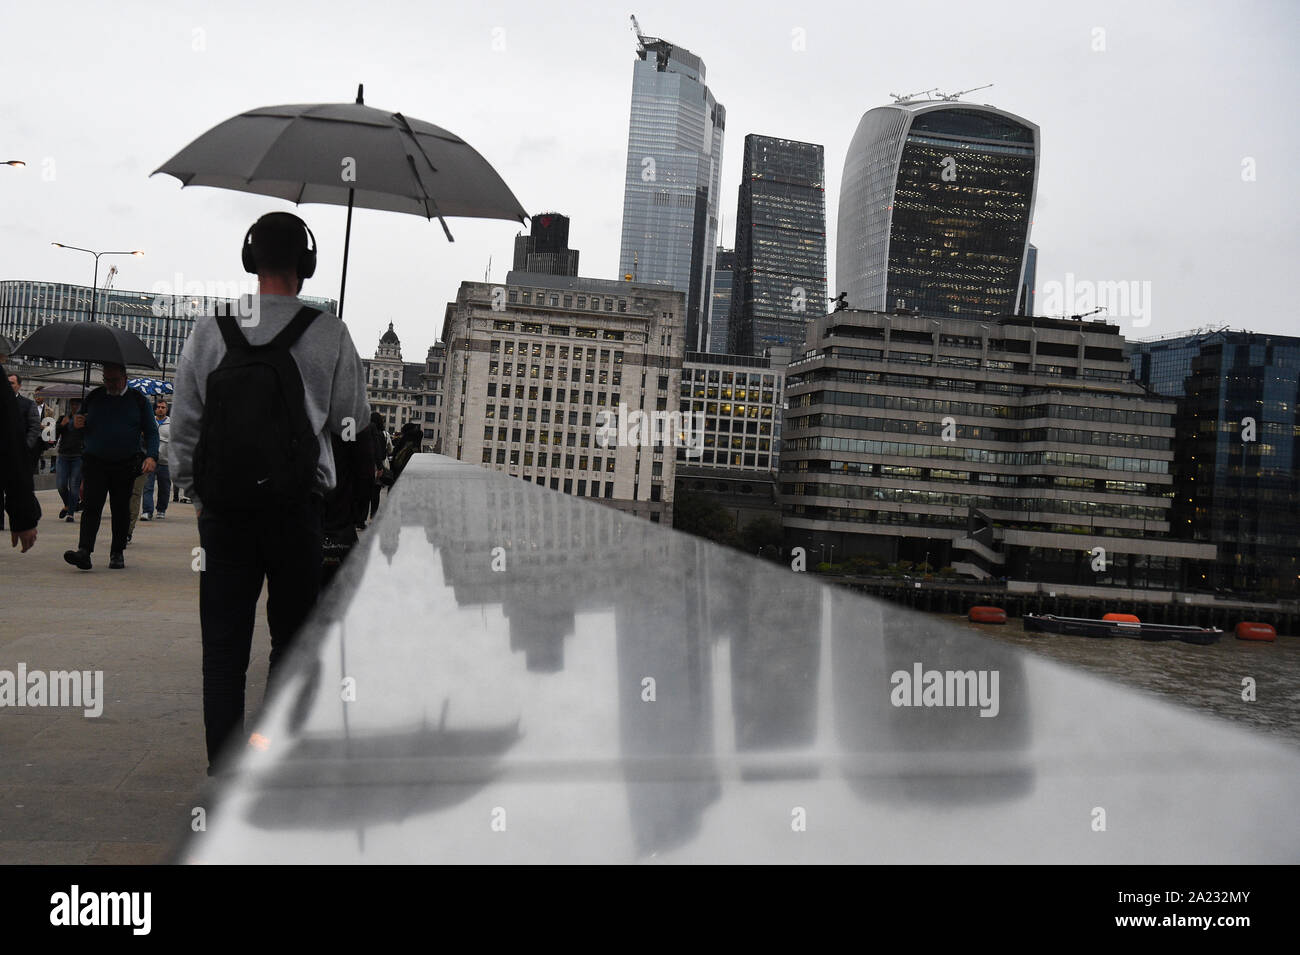 Commuters cross London Bridge, as parts of Britain brace for two more days of heavy downpours, ahead of some snowfall and the leftovers of a hurricane later this week. Stock Photo